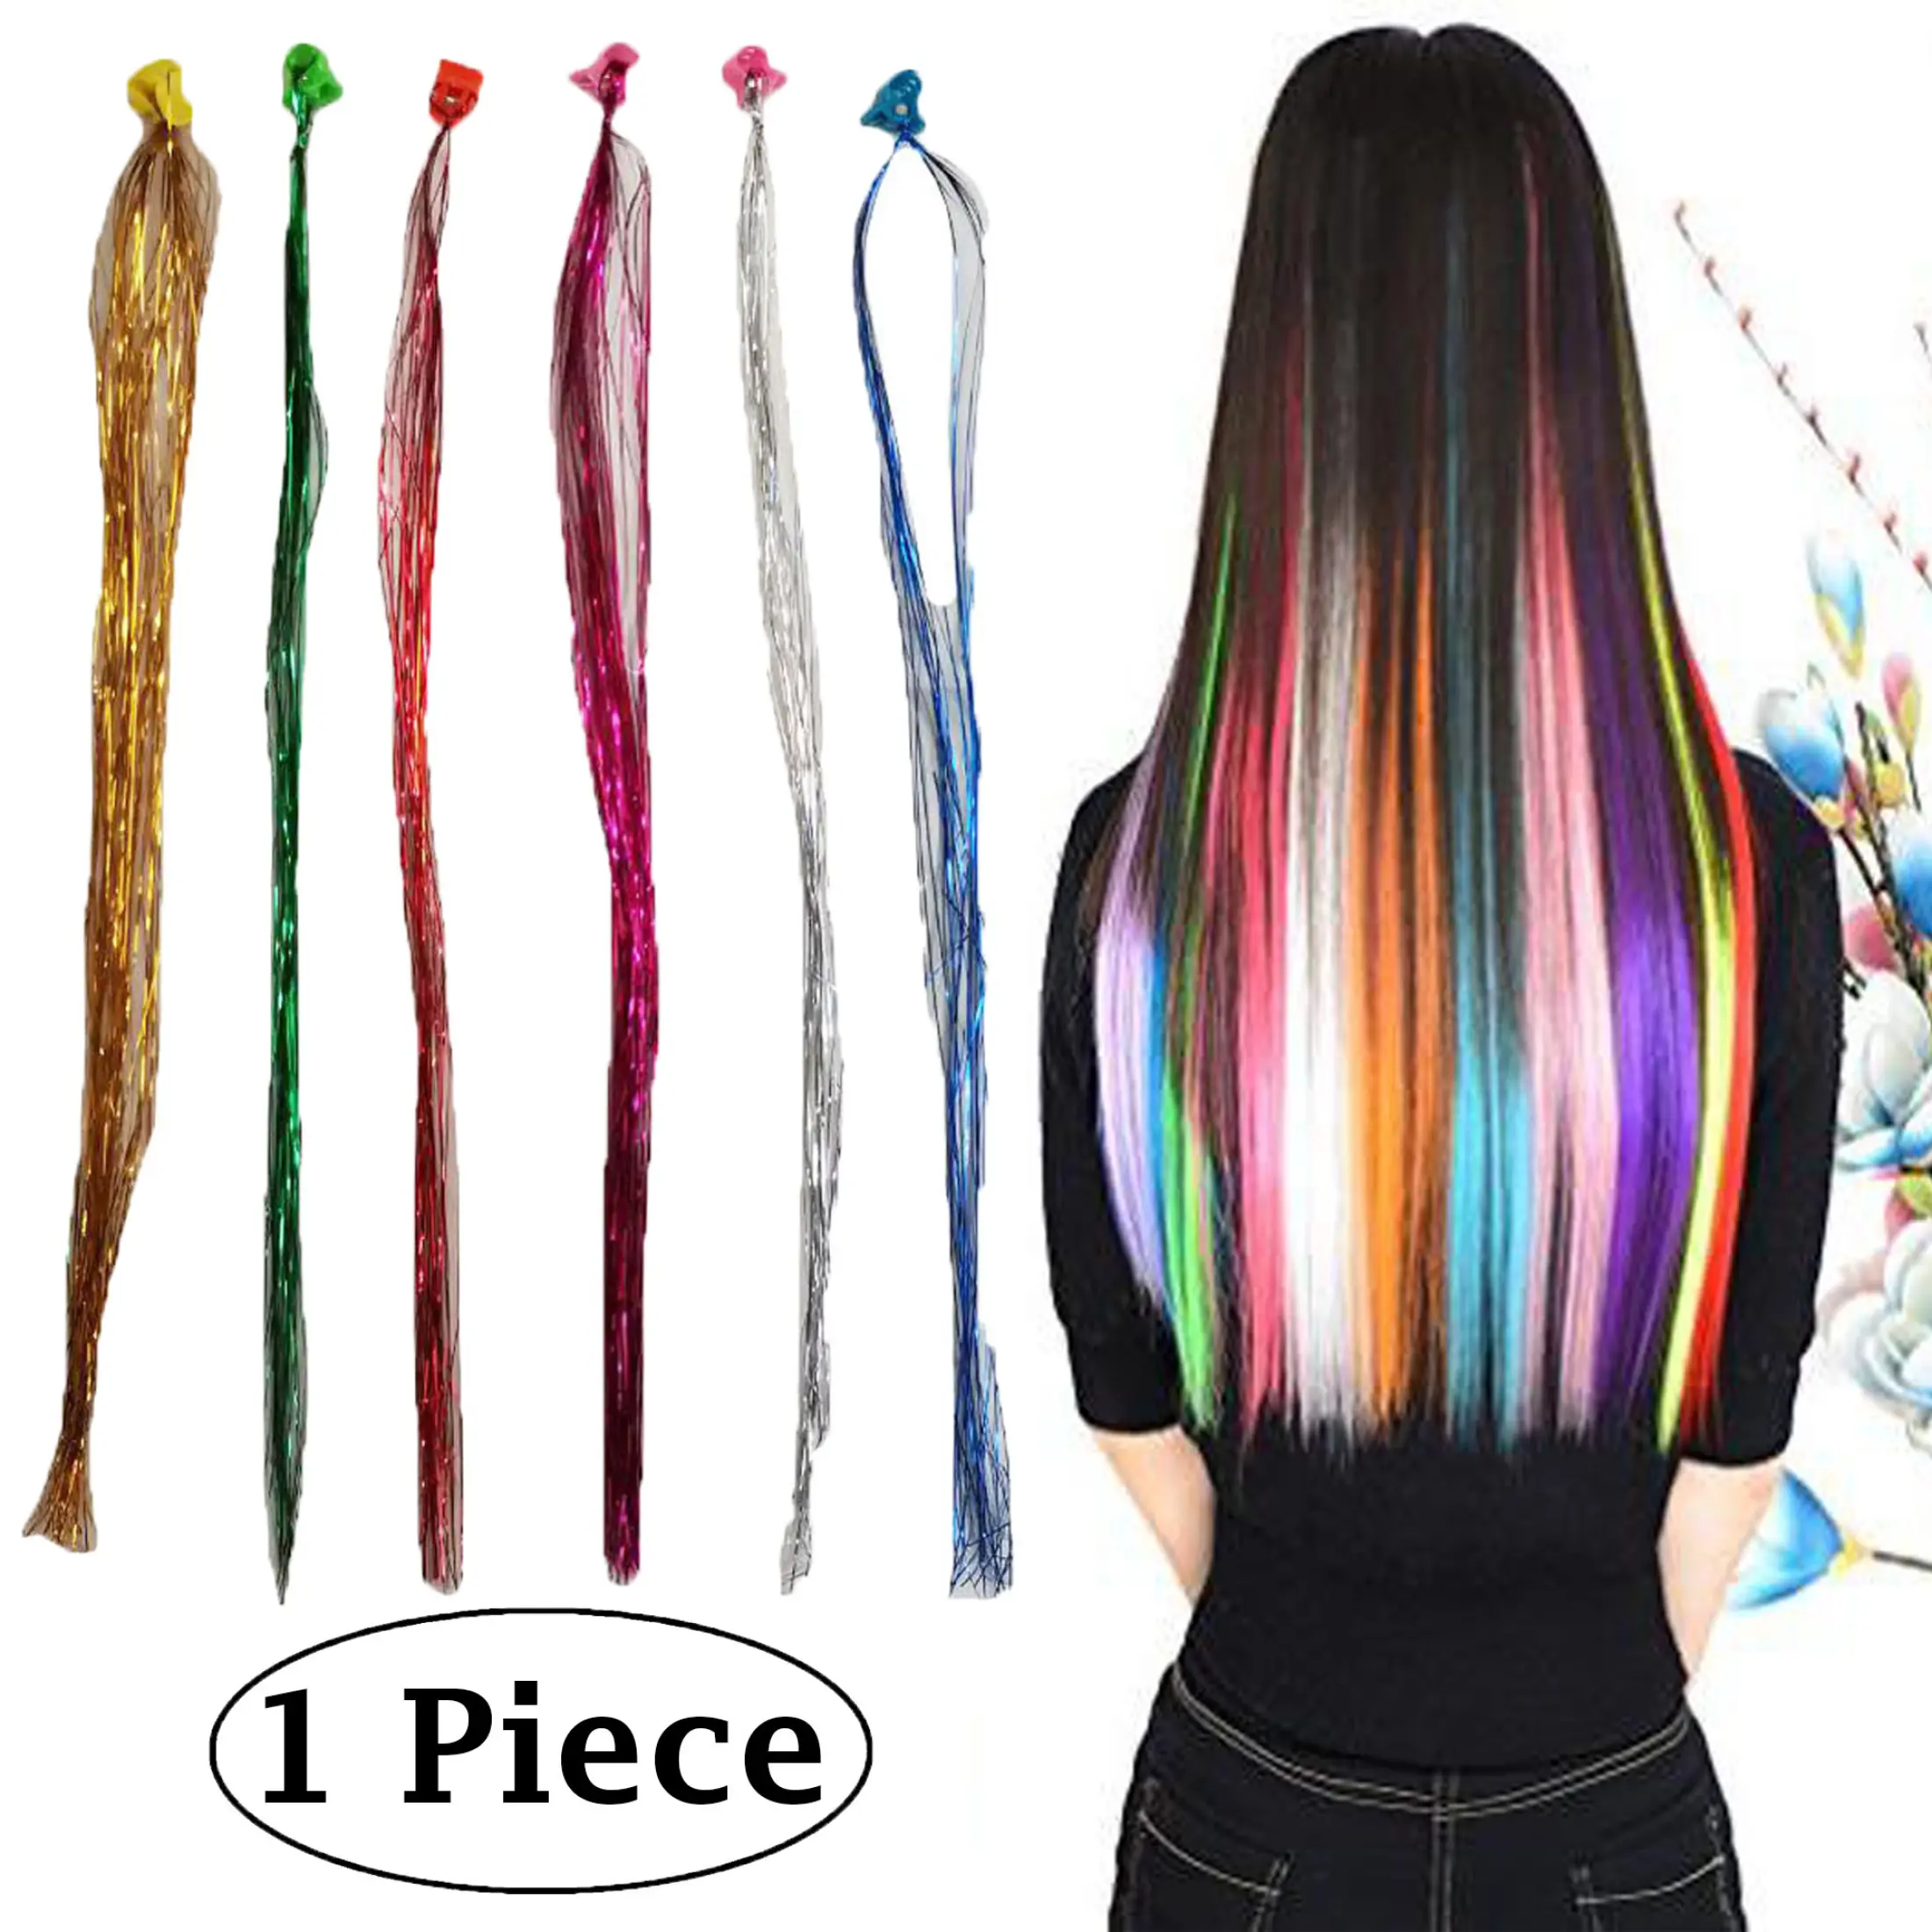 10 Clip Snap-On Children Diva Neon Braided or Straight Hair Extension Highlight Kit Makeover Costume for Birthday Party Favors | Lazada PH